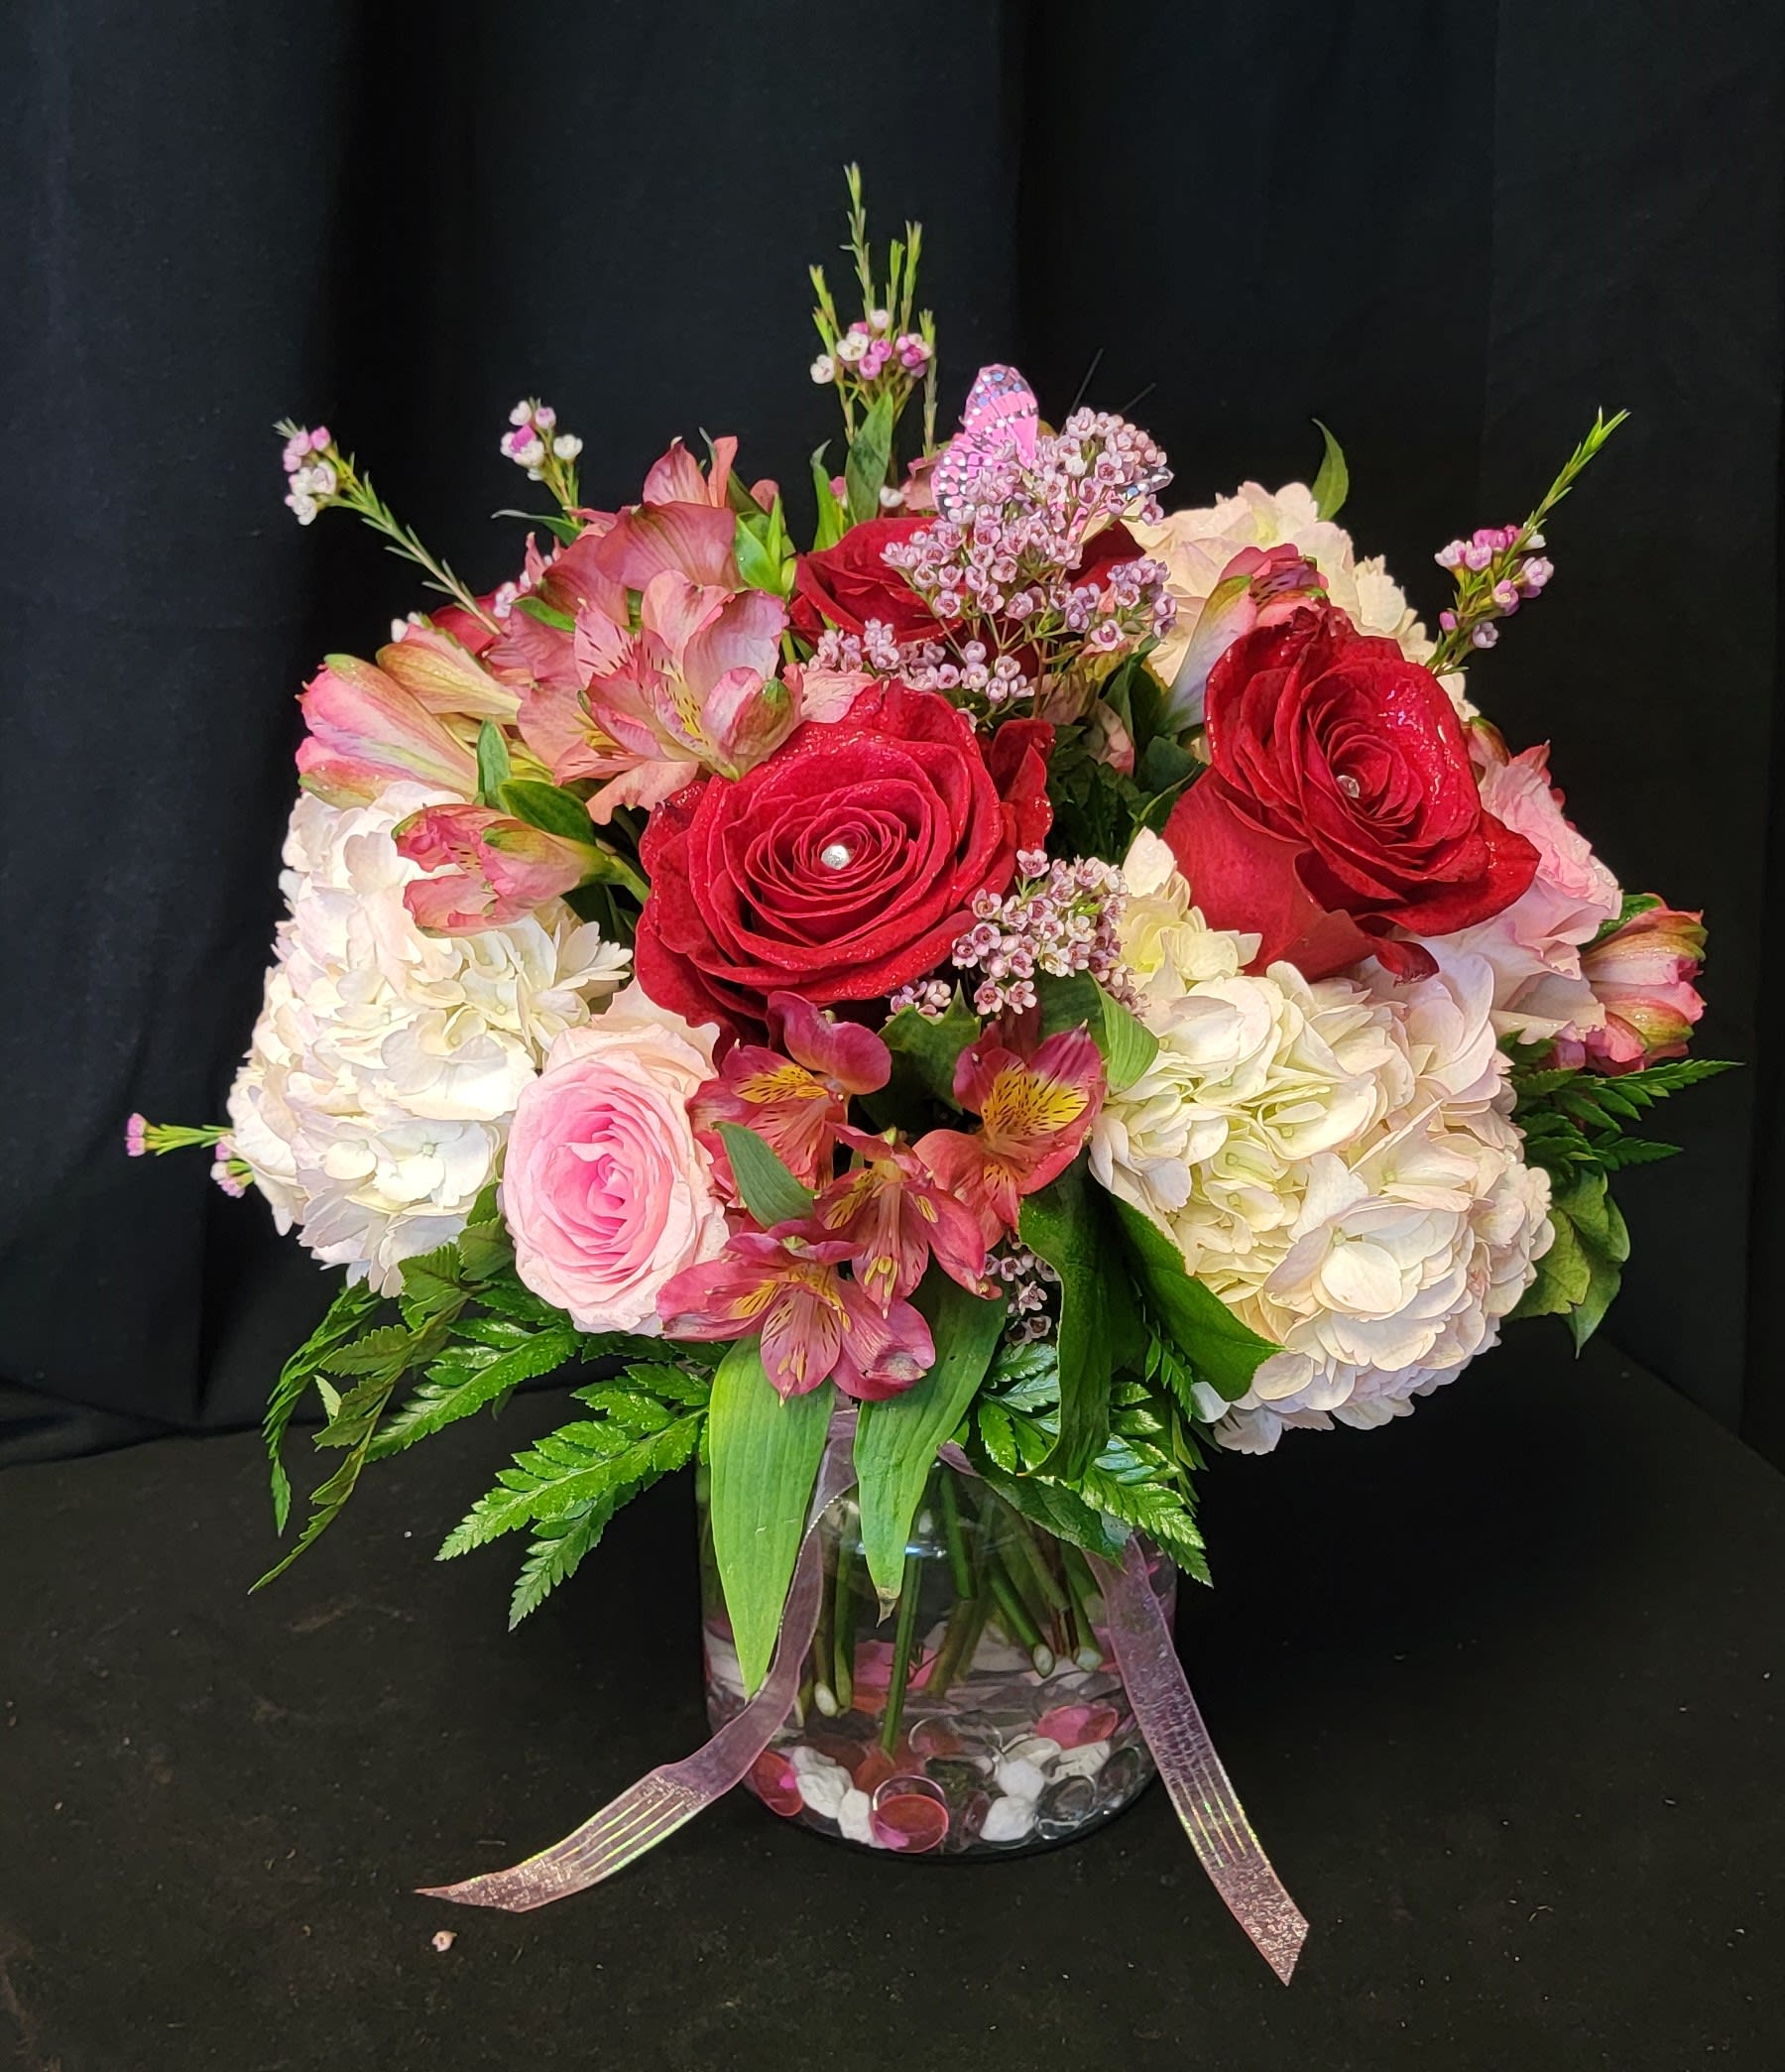 Dreaming of Romance - Win your special someone over with this classic romantic arrangement.